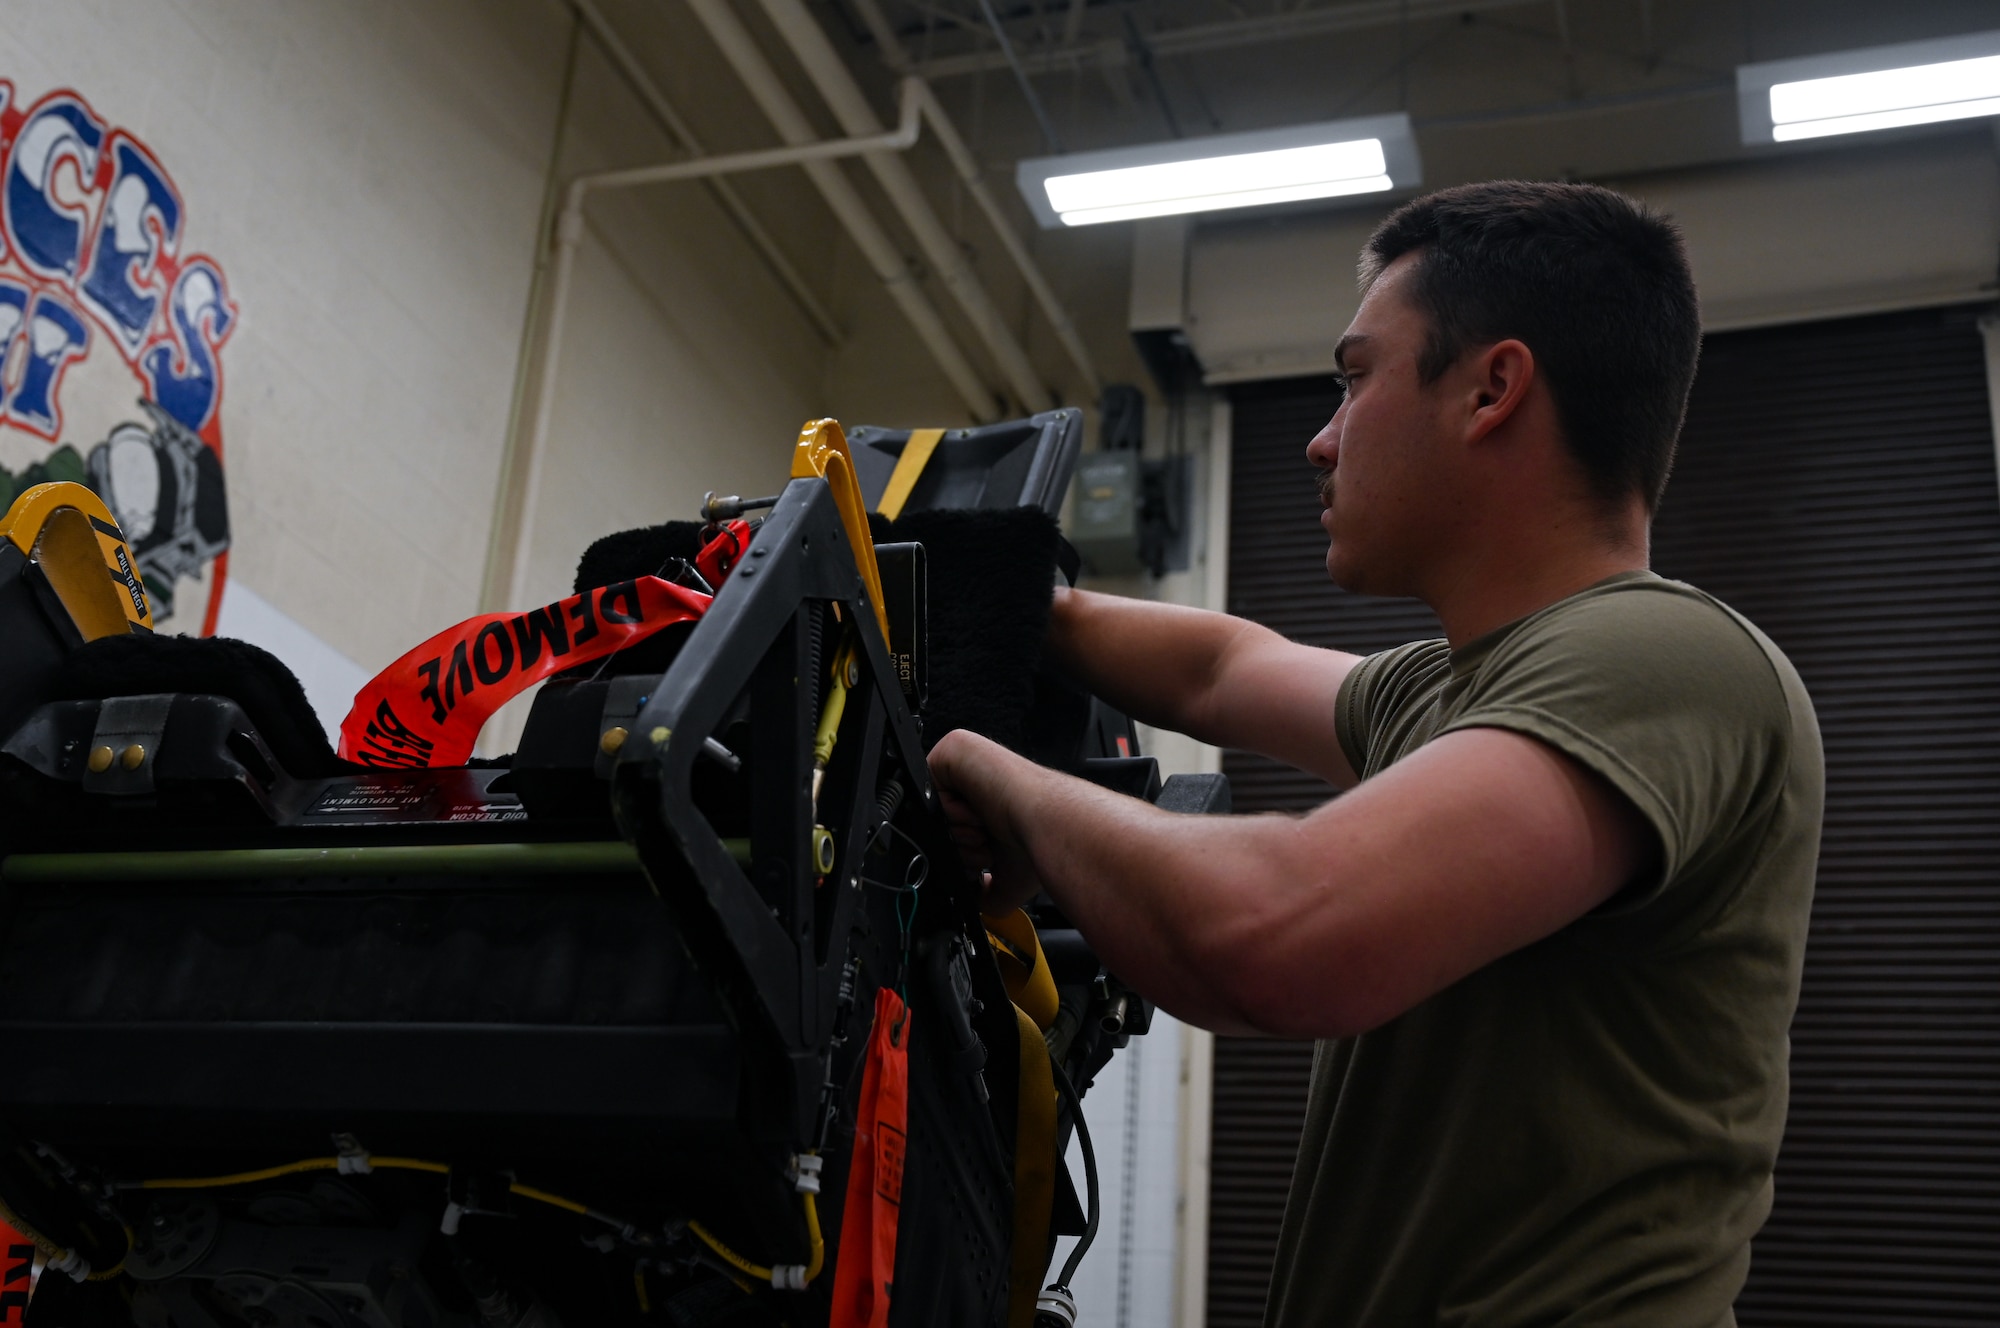 U.S. Air Force Airman 1st Class Korbyn Armijo-Pemble, 509th Maintenance Squadron aircrew egress journeyman, sets up a B-2 Spirit ejection training seat at Whiteman Air Force Base, Missouri, June 15, 2023. Egress is the system that controls the seats ejecting out of the B-2, in the case of an emergency, requiring the pilot and mission commander to get out of the aircraft in a hurry. (U.S. Air Force photo by Senior Airman Victoria Hommel)